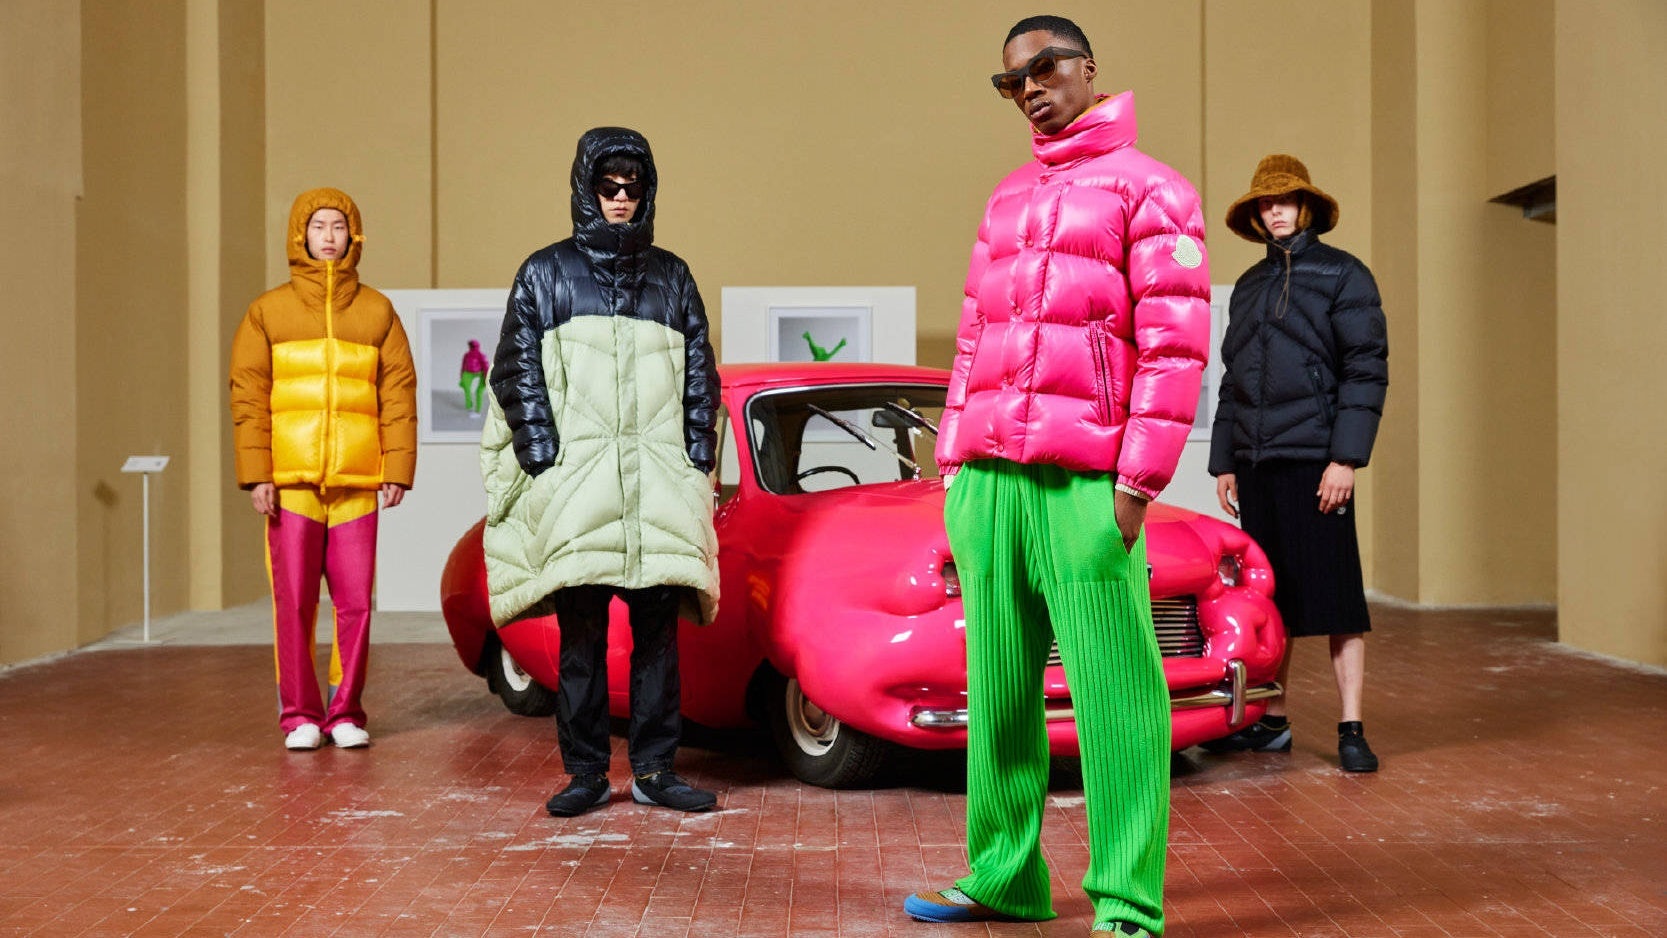 China’s property market just felt its first month-on-month decline in new home prices since 2015 — and, yes, it affects the luxury market. Photo: Moncler